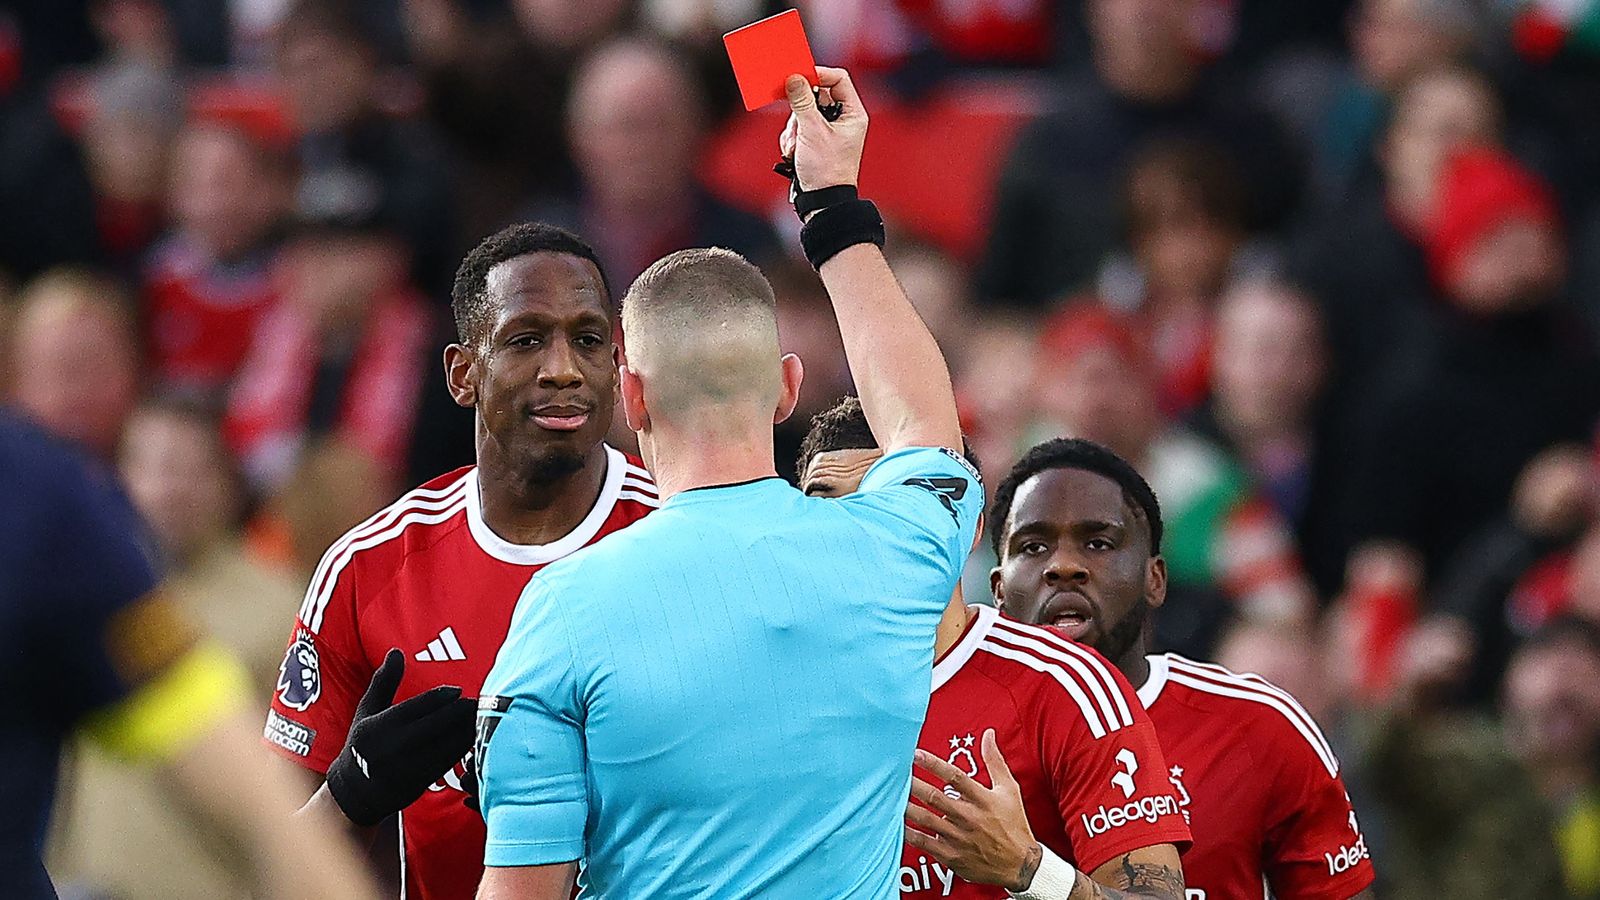 Nottingham Forest boss Nuno Espirito Santo asks why VAR can’t overturn second yellow cards after Willy Boly’s contentious dismissal | Football News